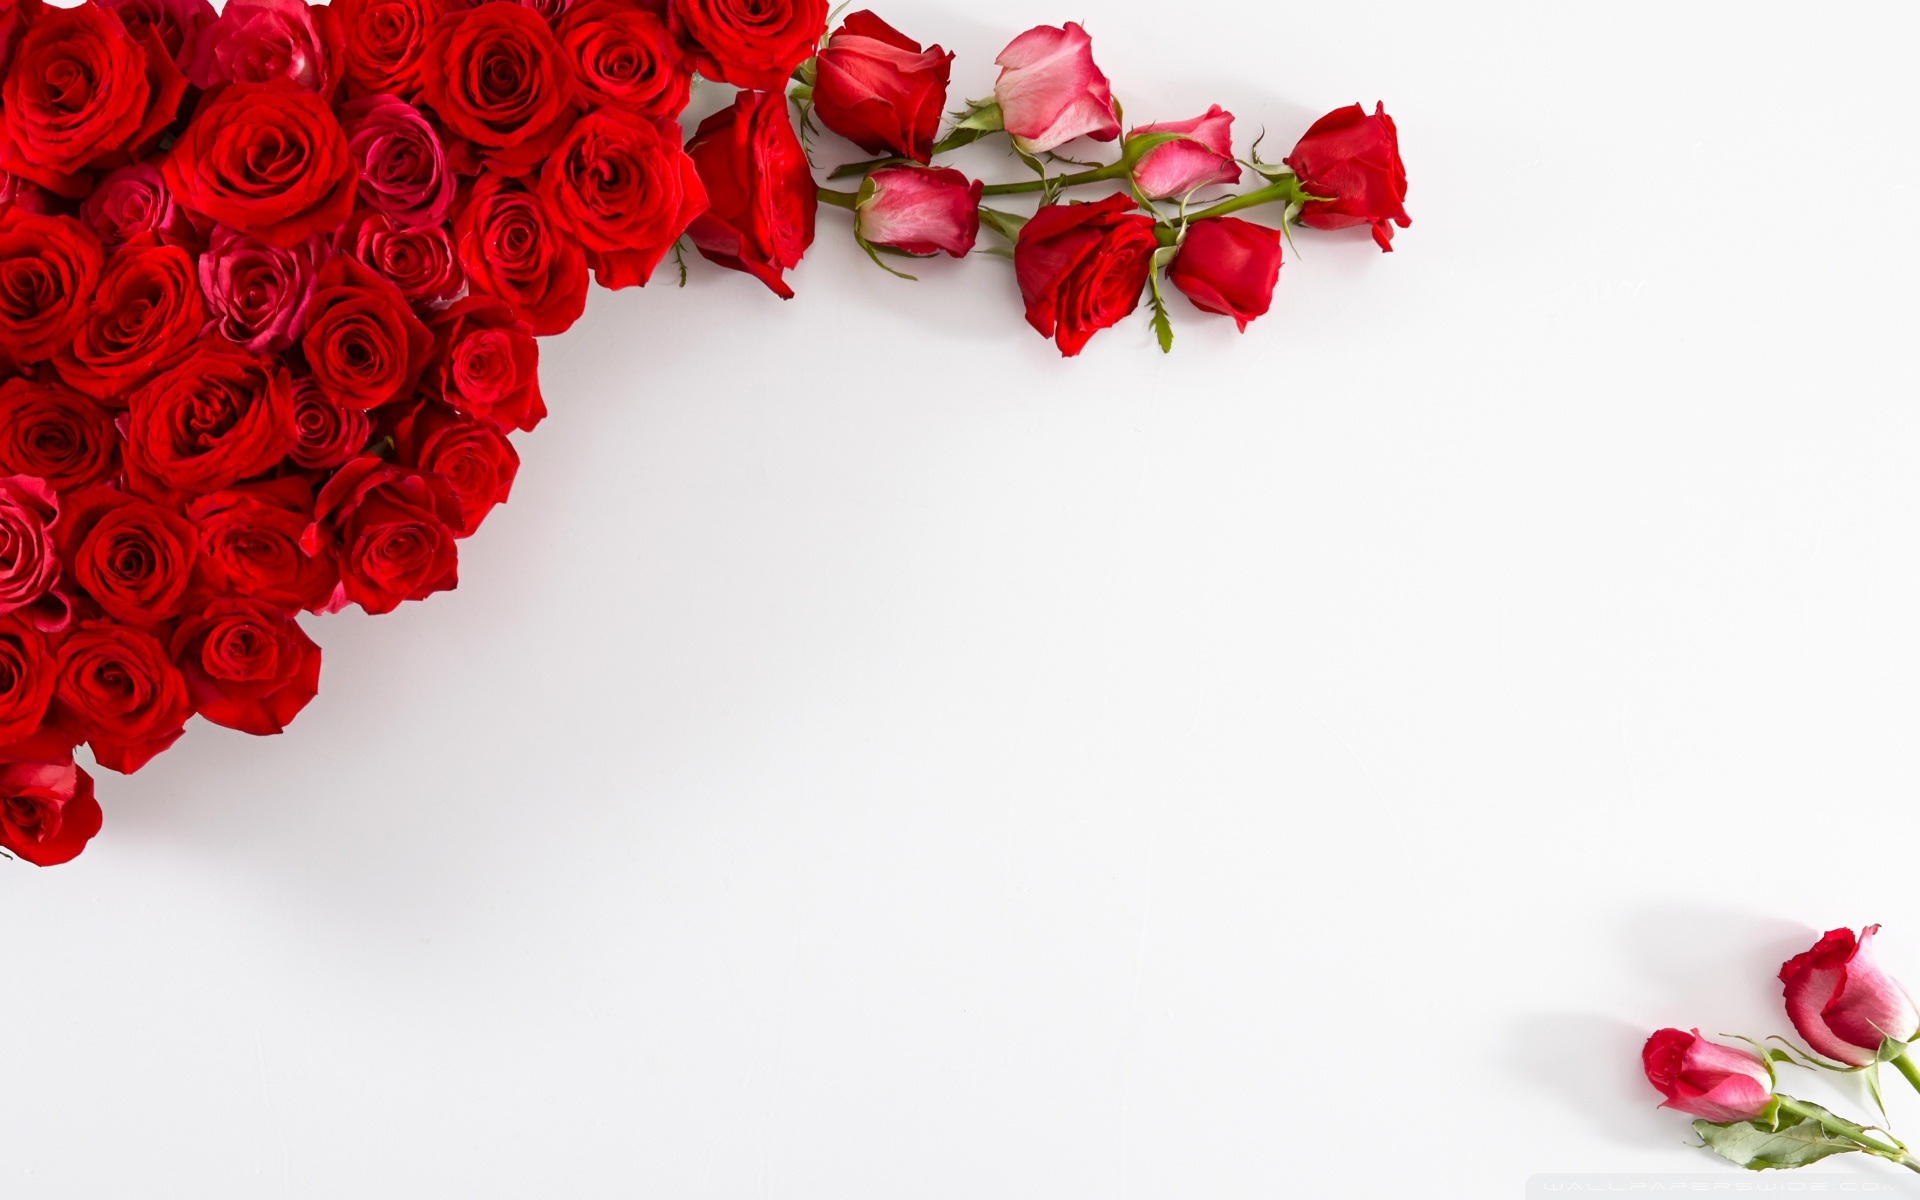 Red rose flowers card and frame wallpapers Beautiful hd